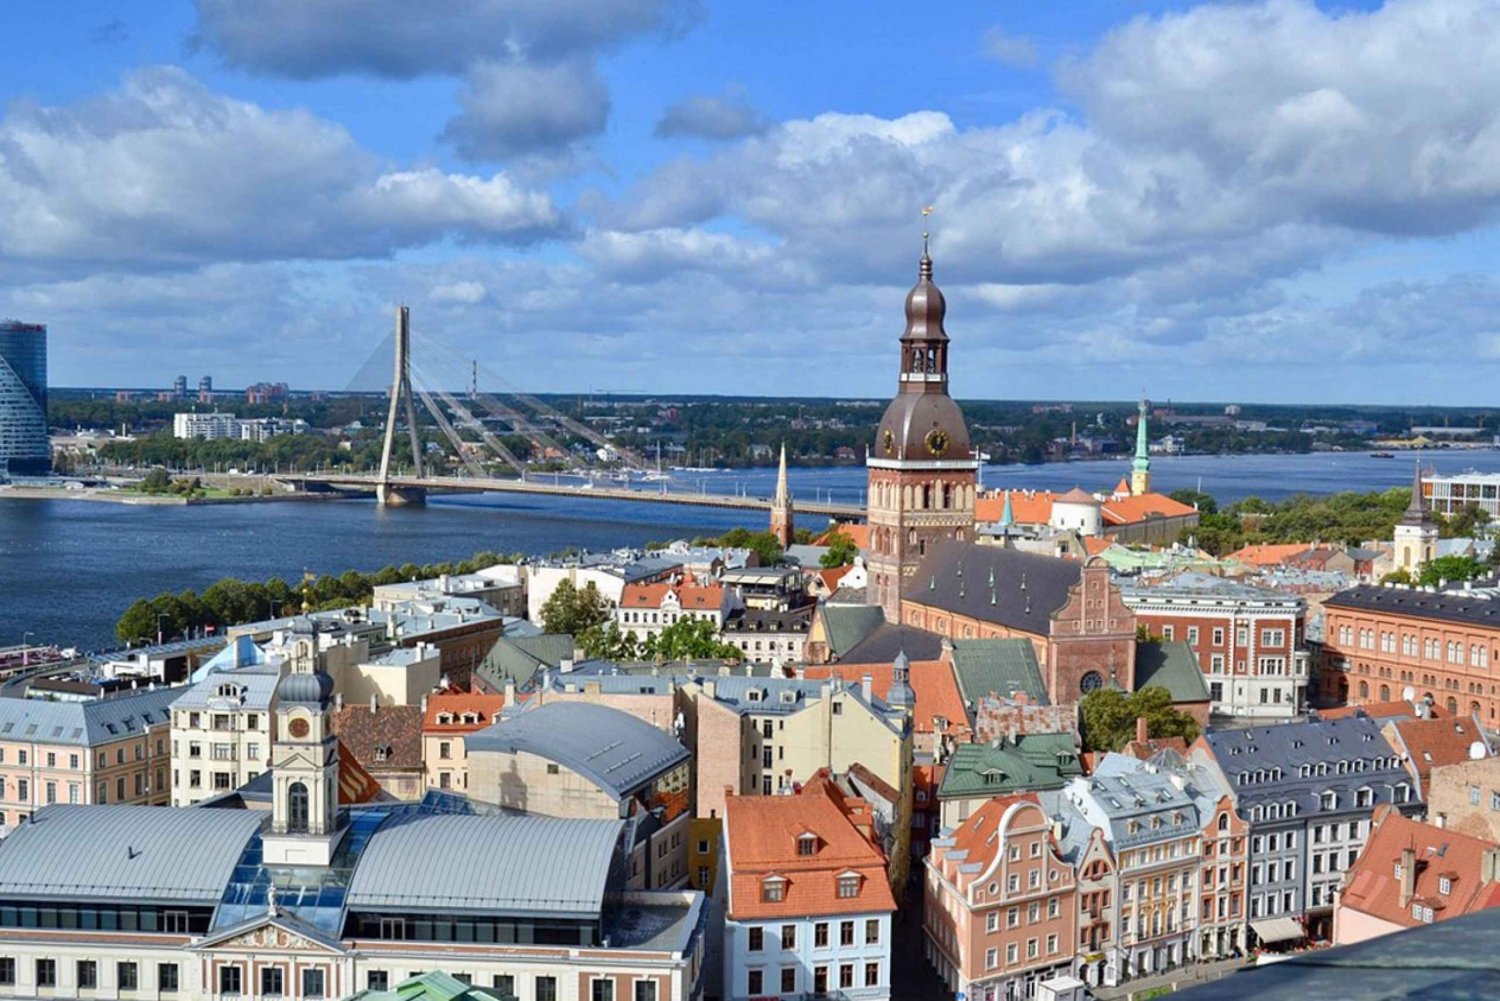 Riga: Unlimited City Pass with Free and Discounted Benefits